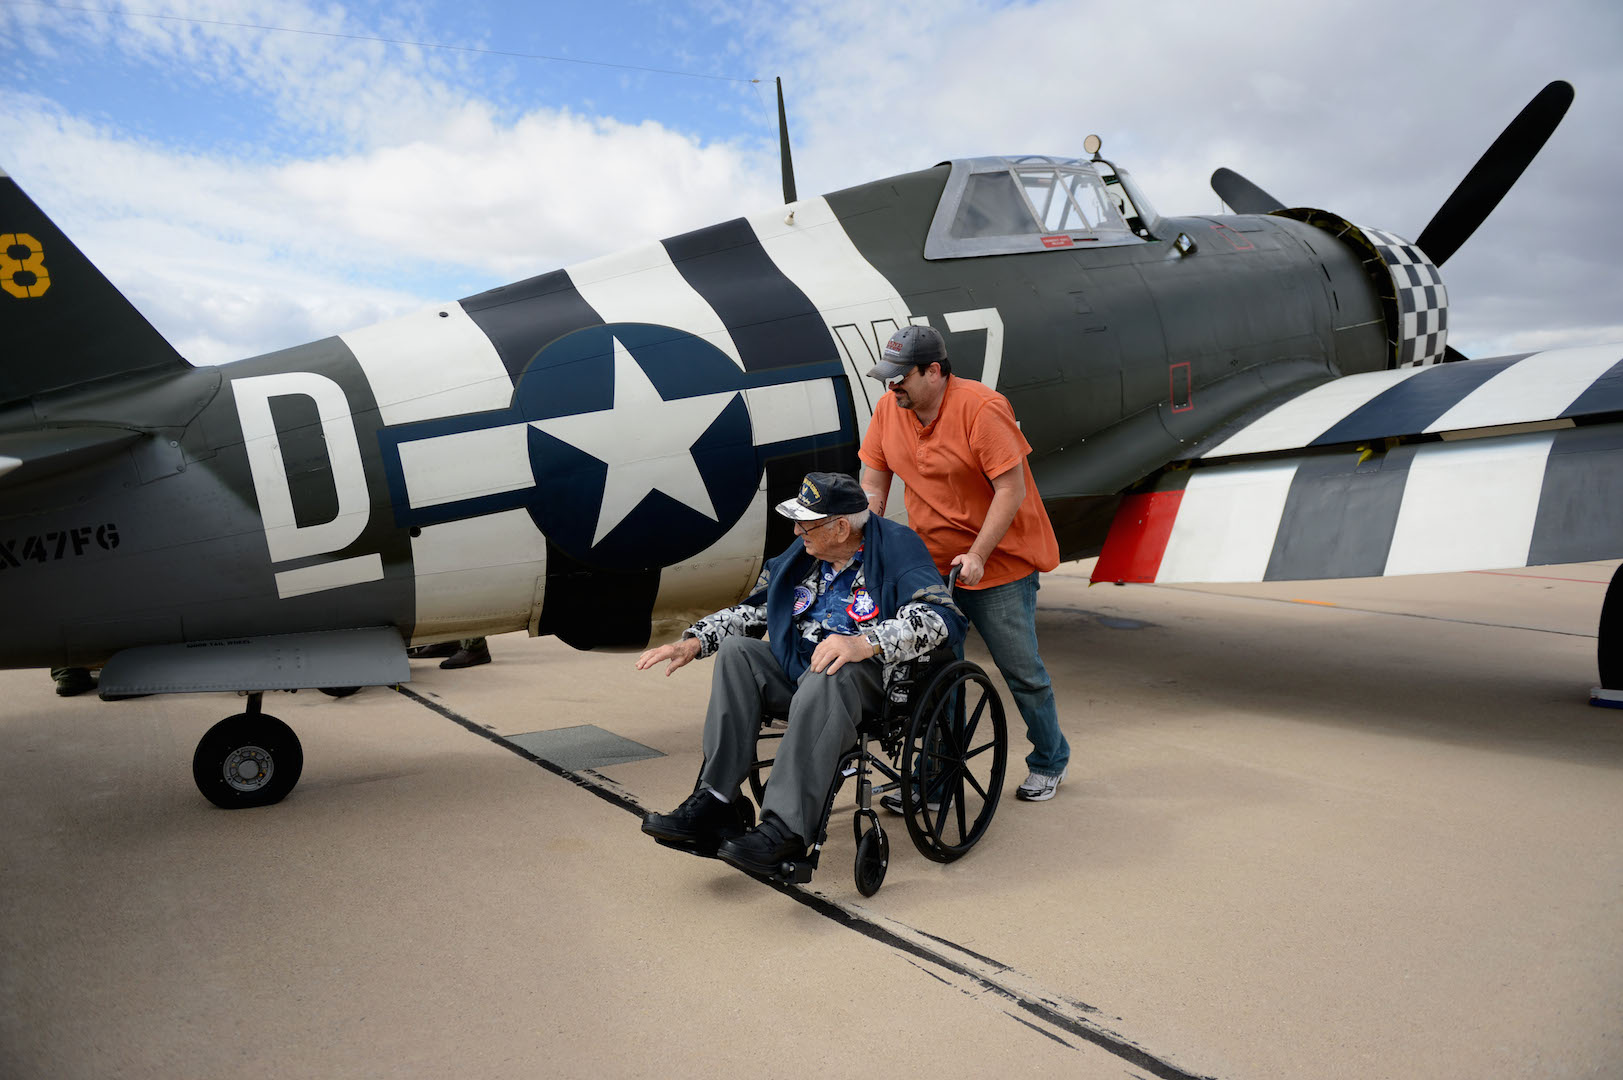 Retired Air National Guard Chief Warrant Officer 2 Robert Hertel touches a P-47 Thunderbolt, for the first time since the 1960's, during the Heritage Flight Training and Certification Course Feb. 28, 2015, at Davis-Monthan Air Force Base, Ariz. Hertel was given the opportunity to visit the aircraft as well as received praise from Gen. Hawk Carlisle, Commander of Air Combat Command, for his contributions to America. (U.S. Air Force photo/Senior Airman Jensen Stidham)